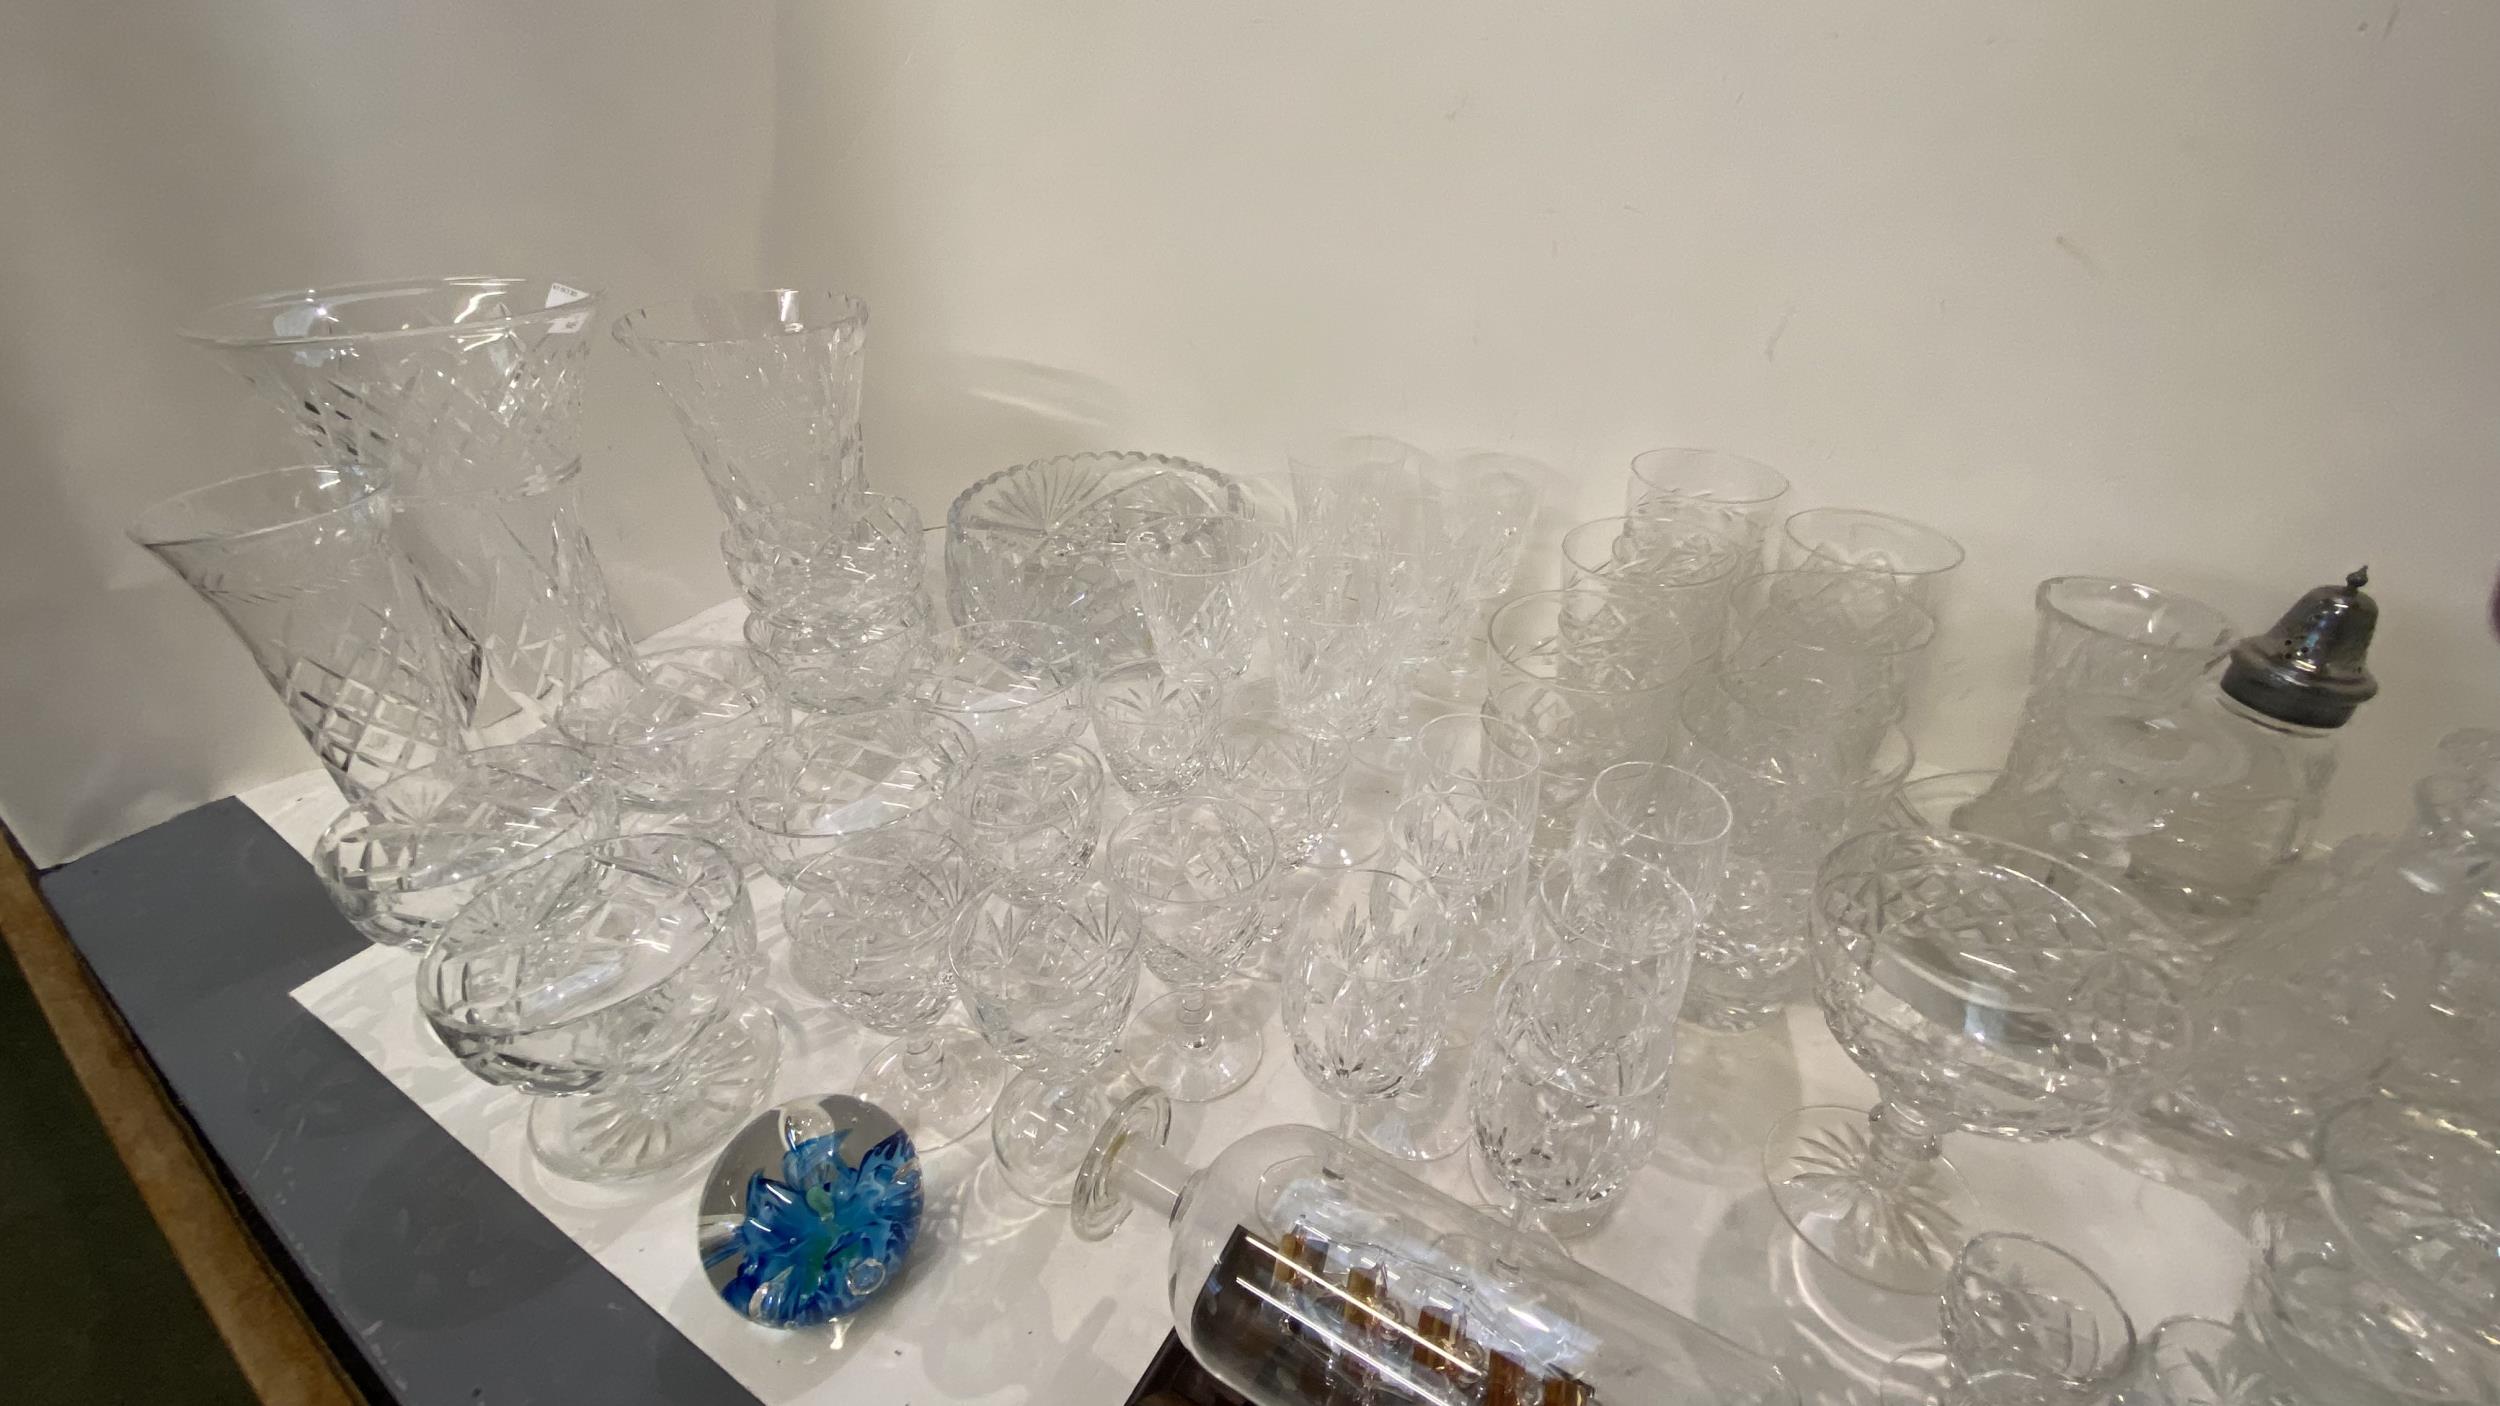 Large qty of glass wear including decanters, vases, wine glassed, tumblers etc. - Image 5 of 7